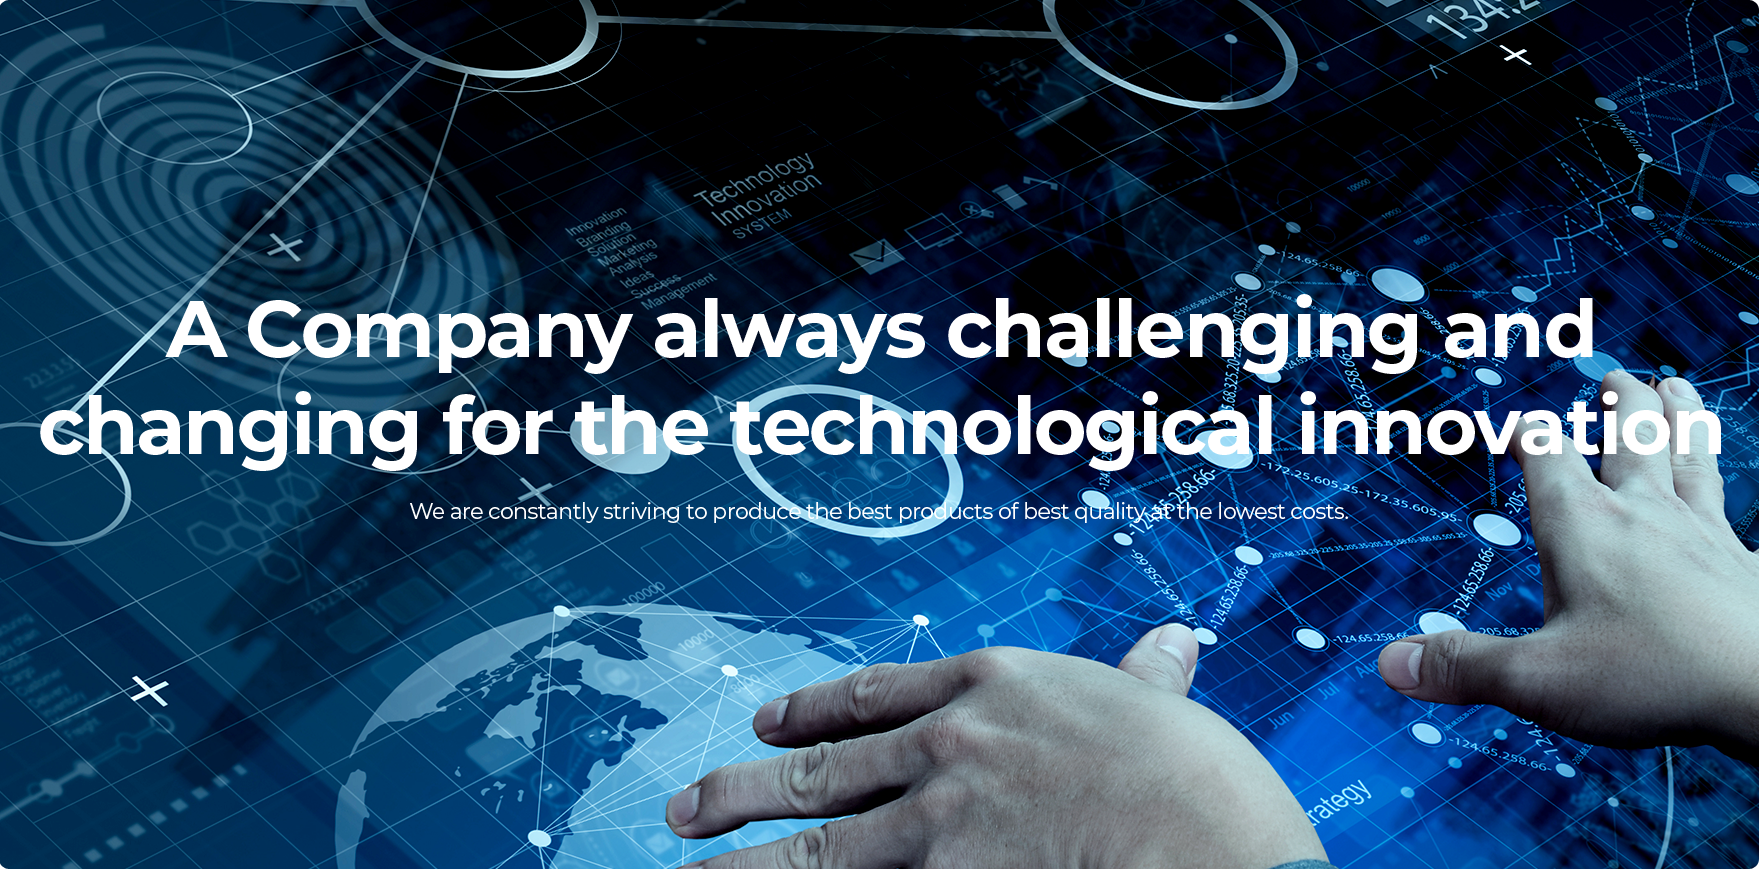 A Company always challenging and changing for the technological innovation